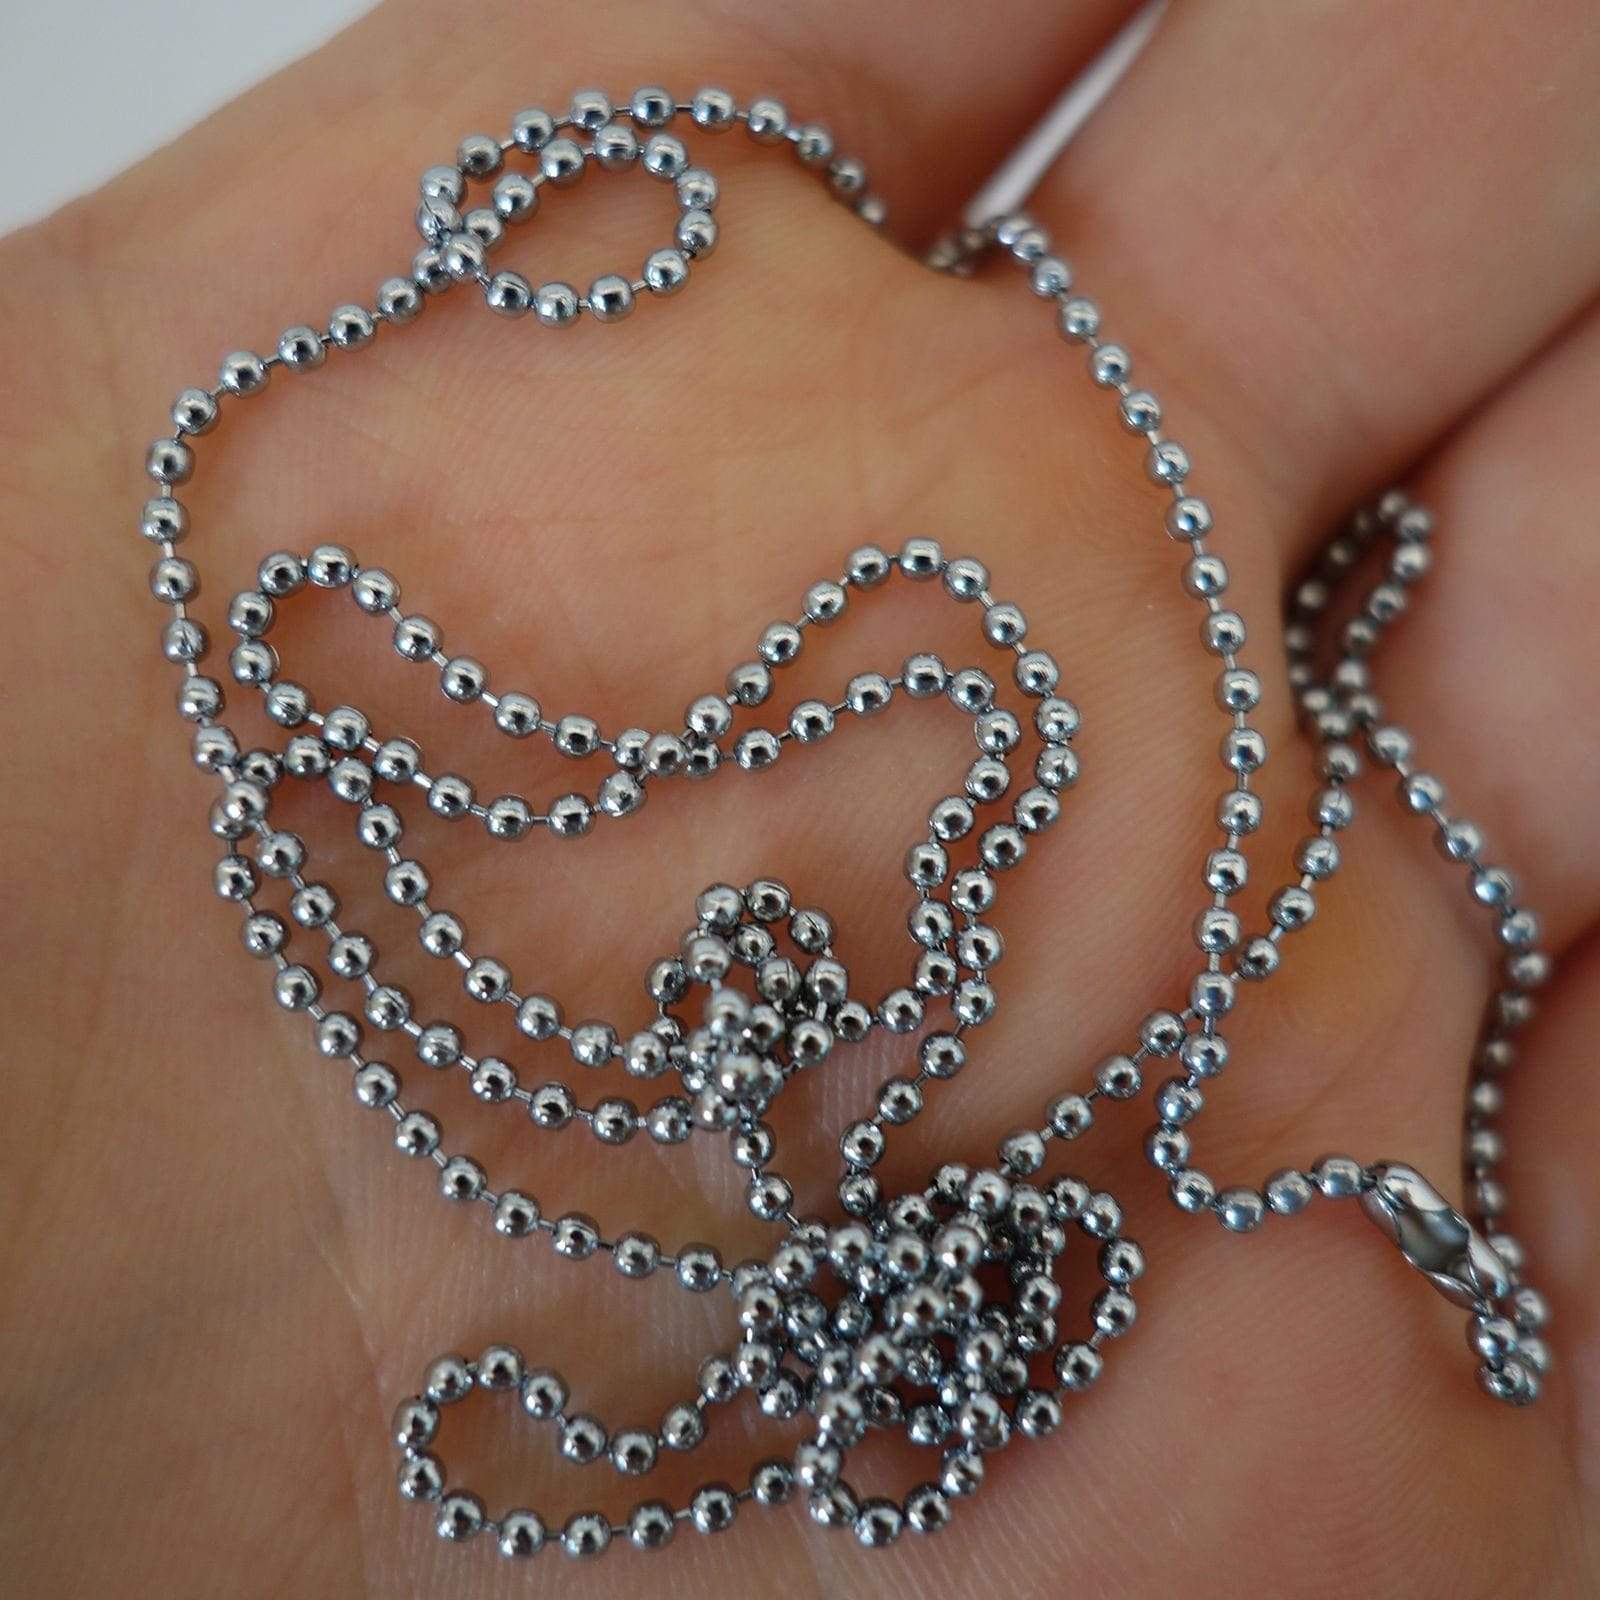 Silver Colour Steel Chain Metal Necklace Mens Womens Ladies Girls Boys Childrens